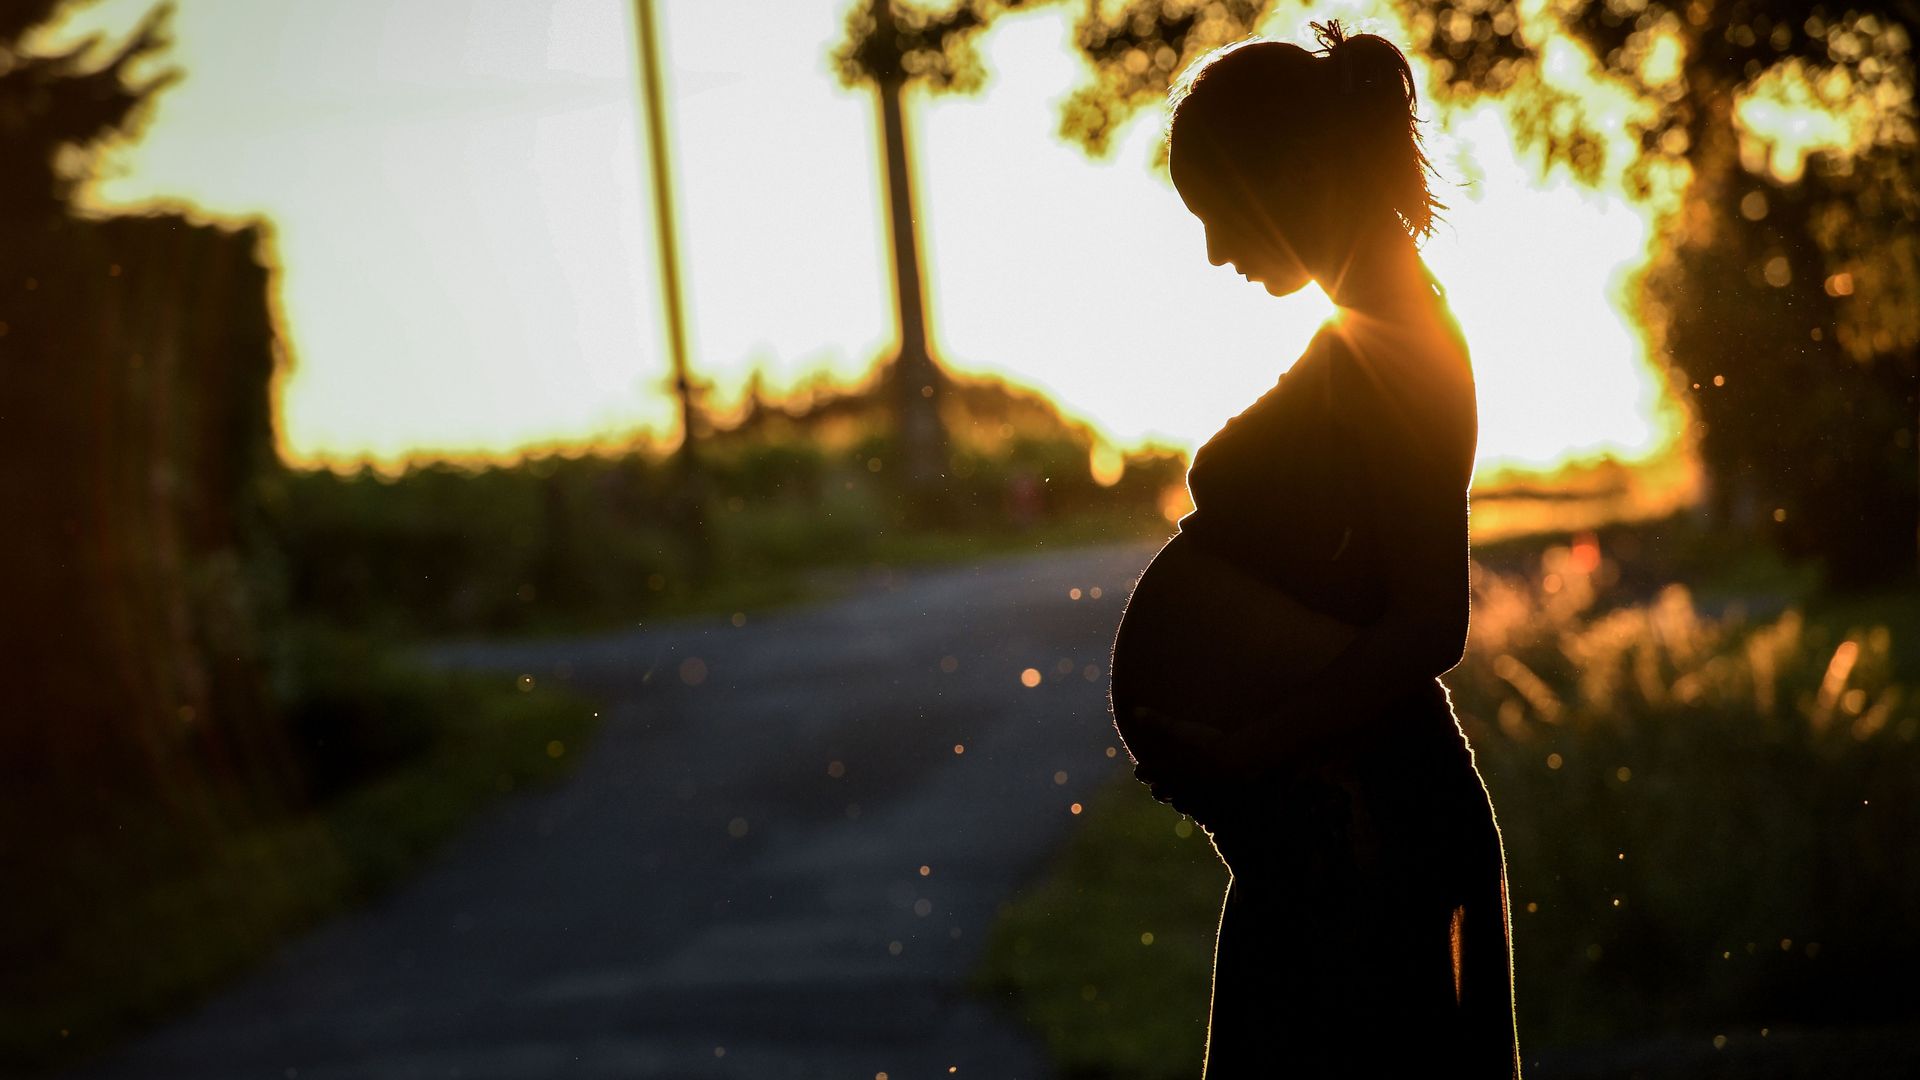 The silhouette of a pregnant woman in front of a sunset